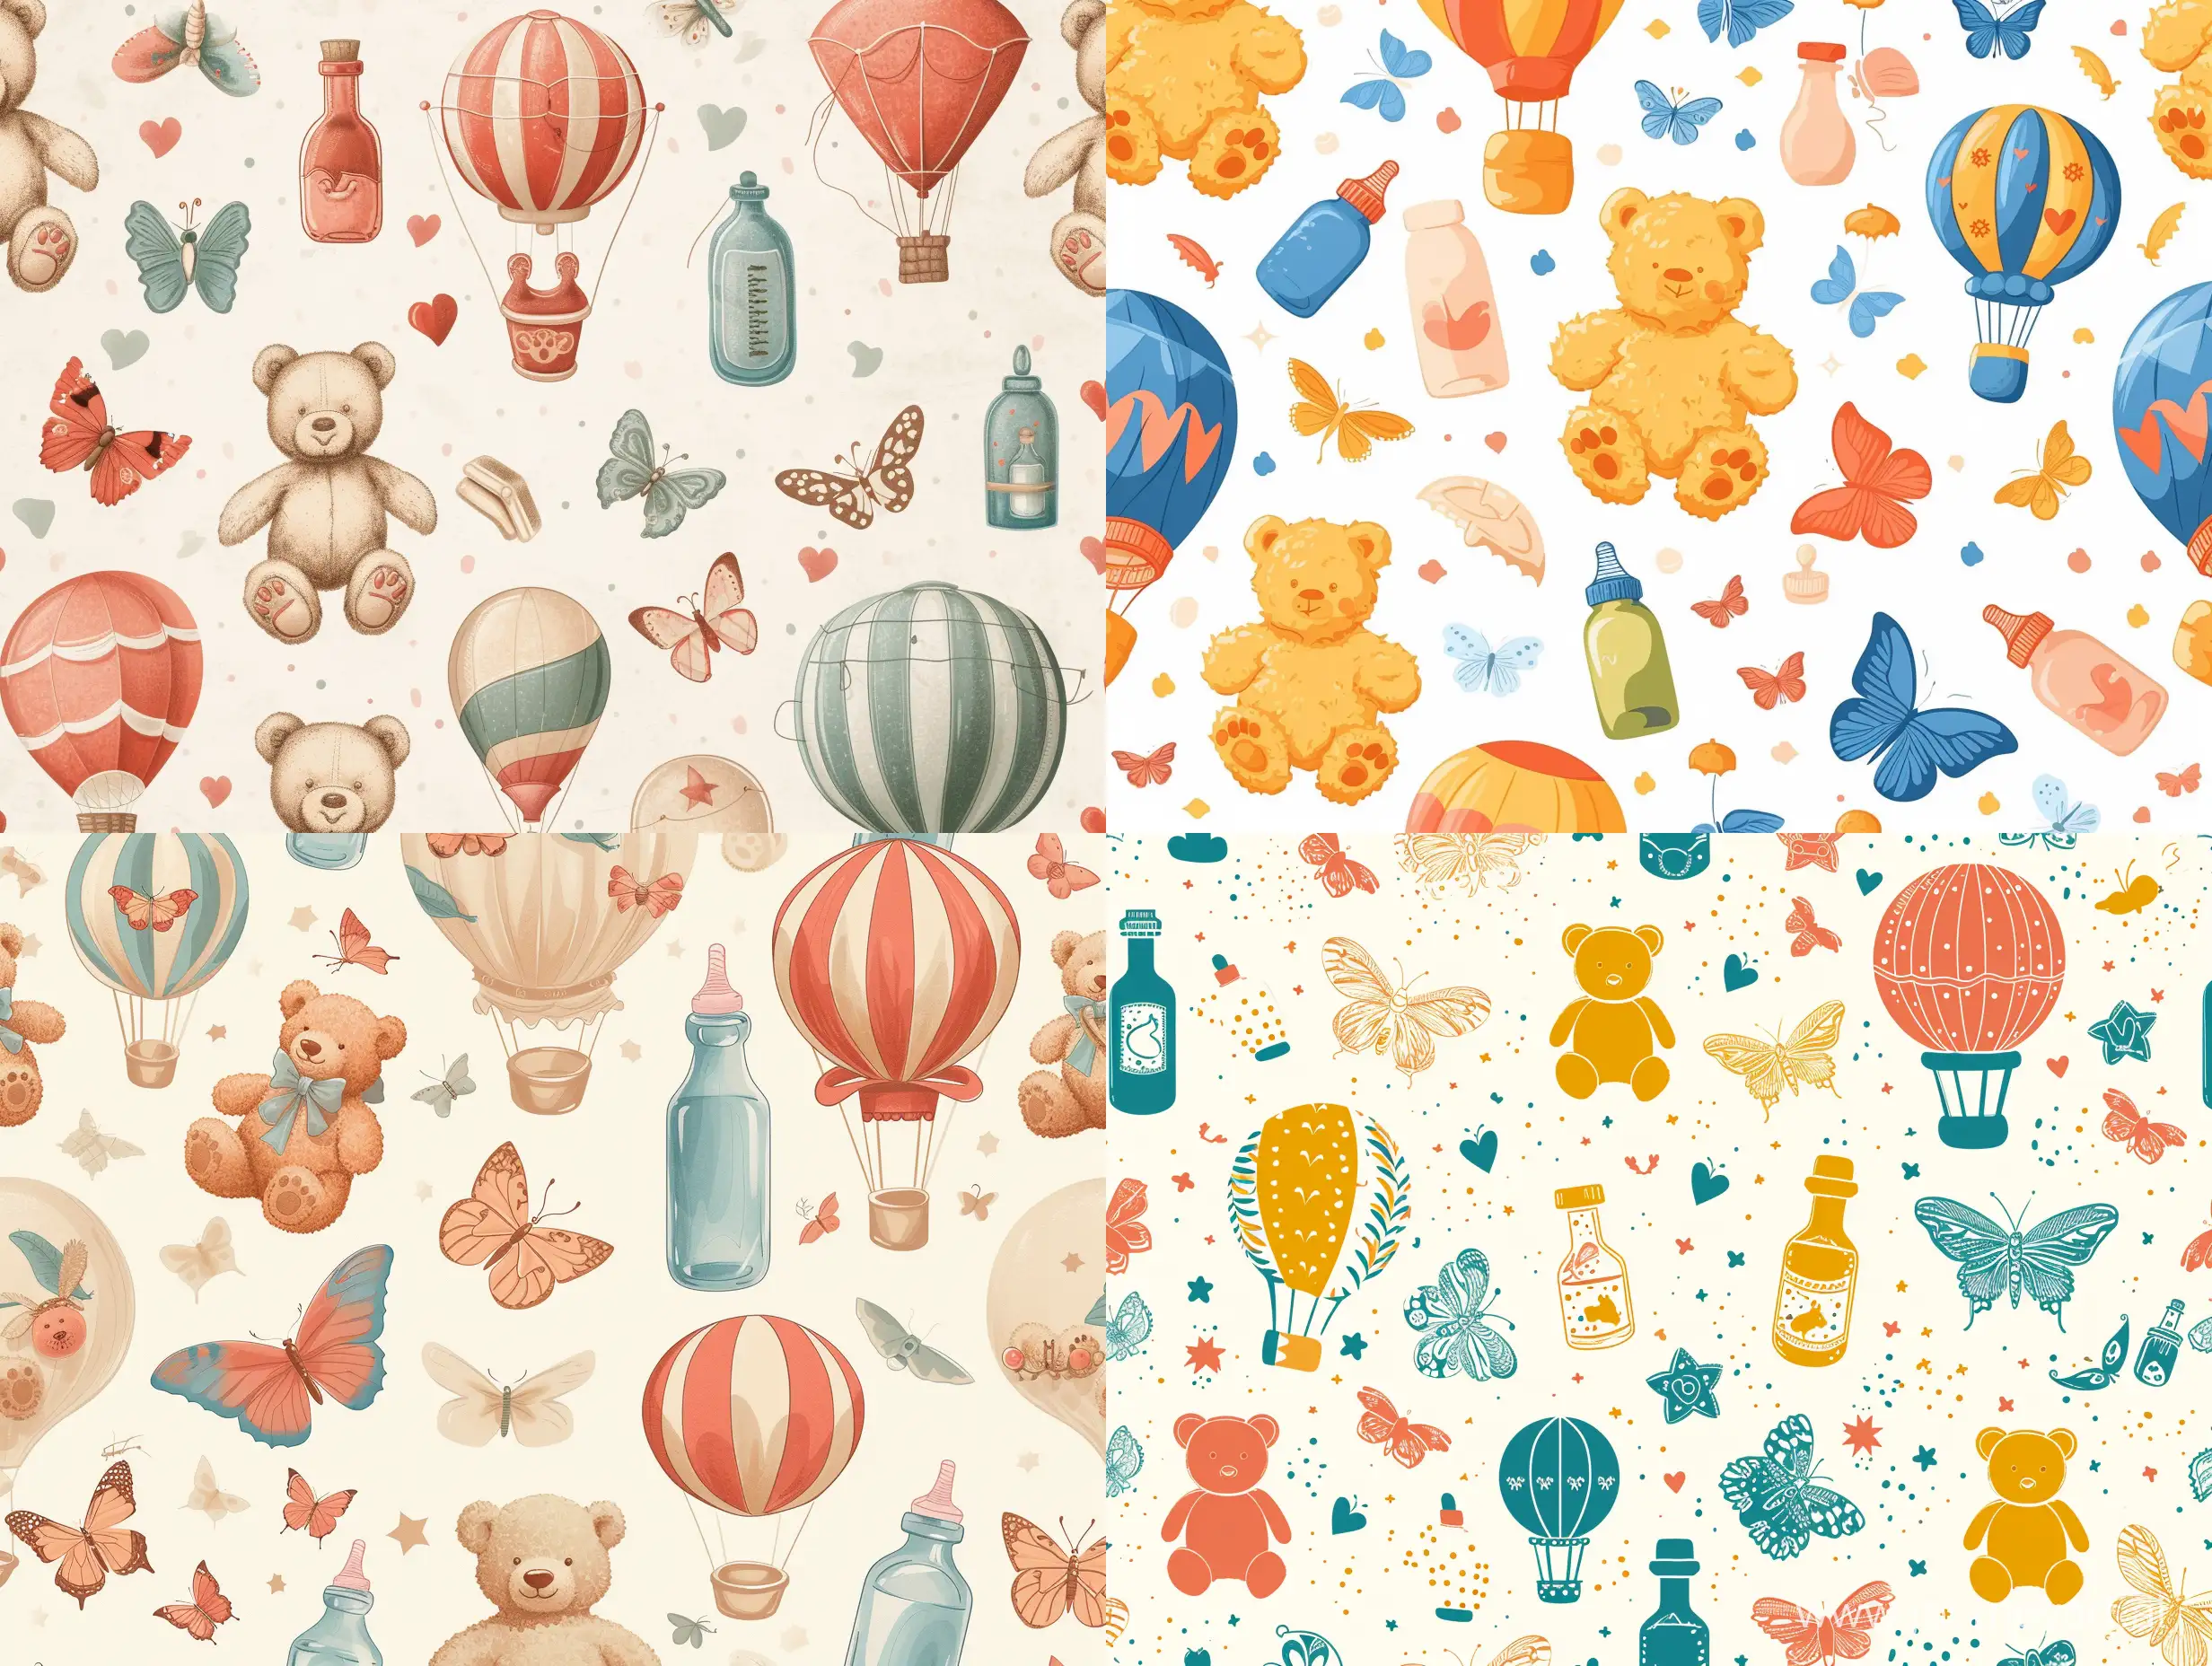 Whimsical-Teddy-Bear-Texture-with-Butterflies-Hot-Air-Balloons-and-Baby-Bottles